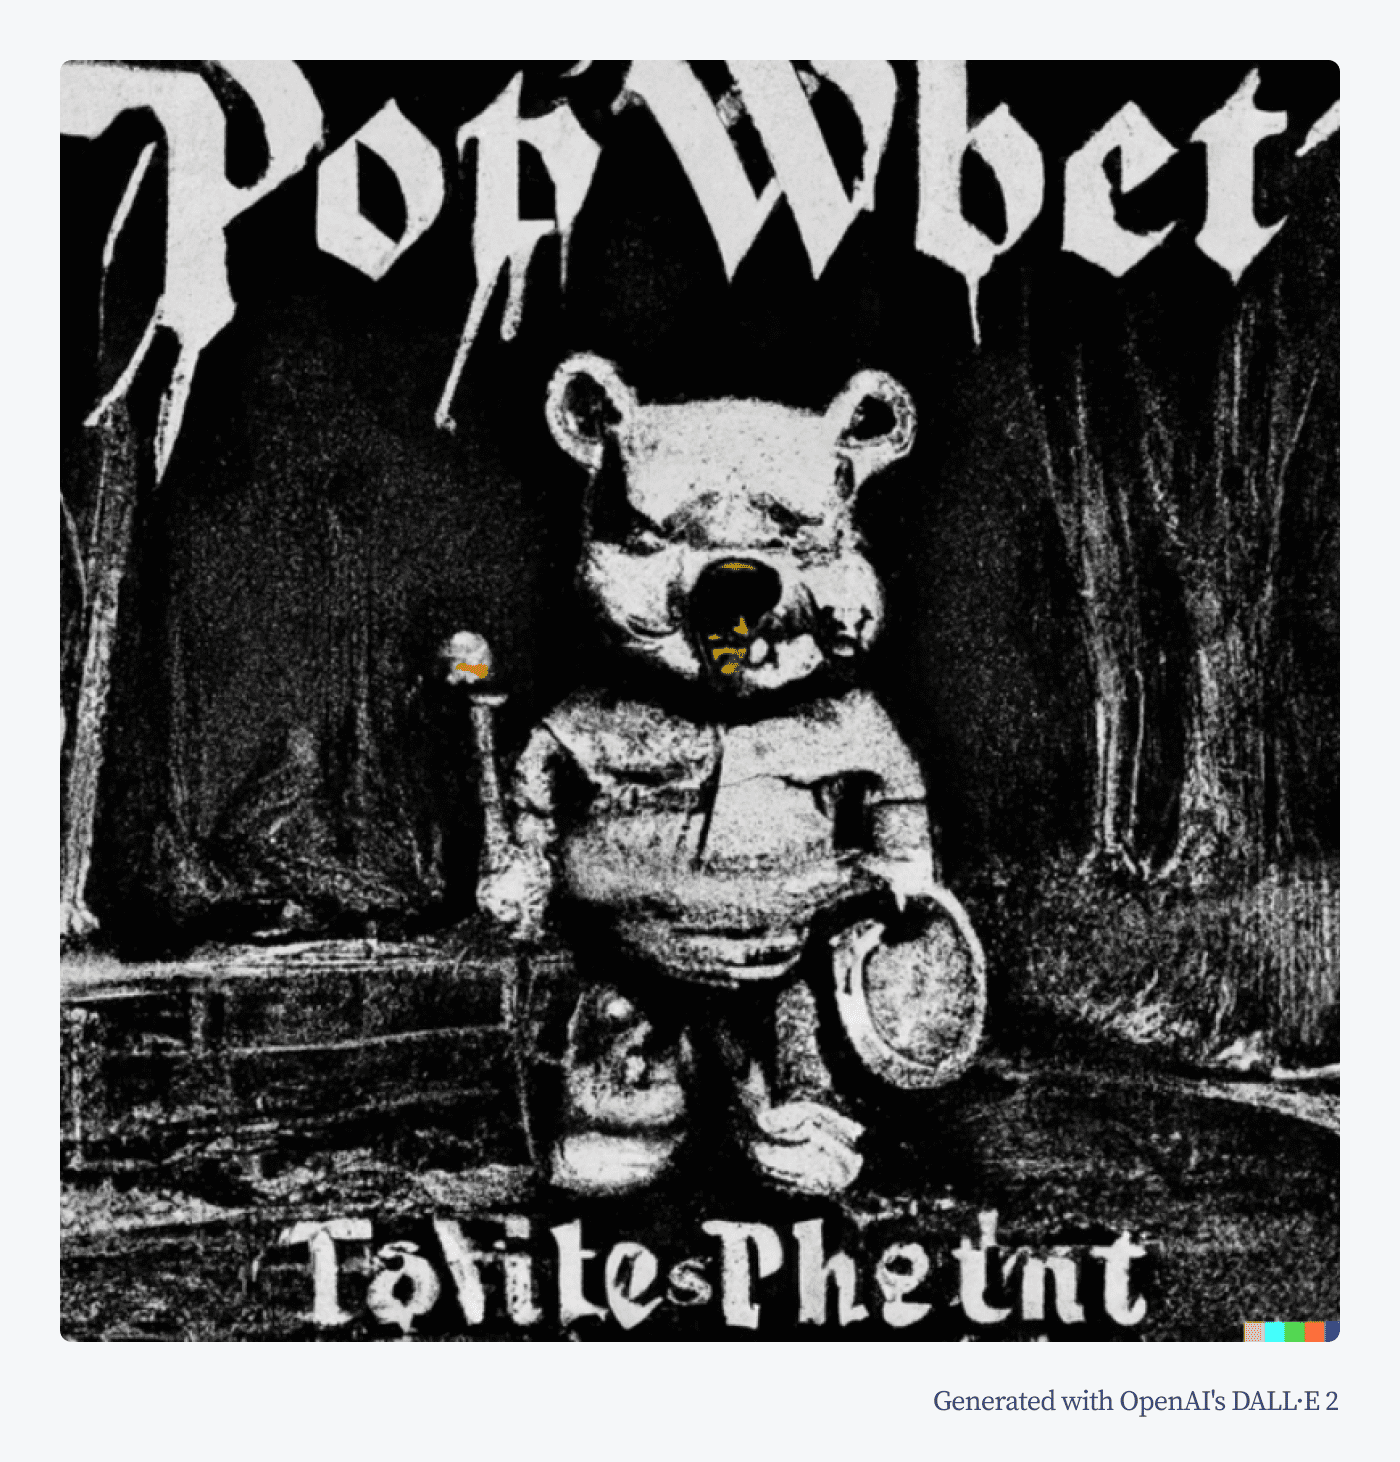 Winnie the Pooh in the style of a black metal album cover artwork